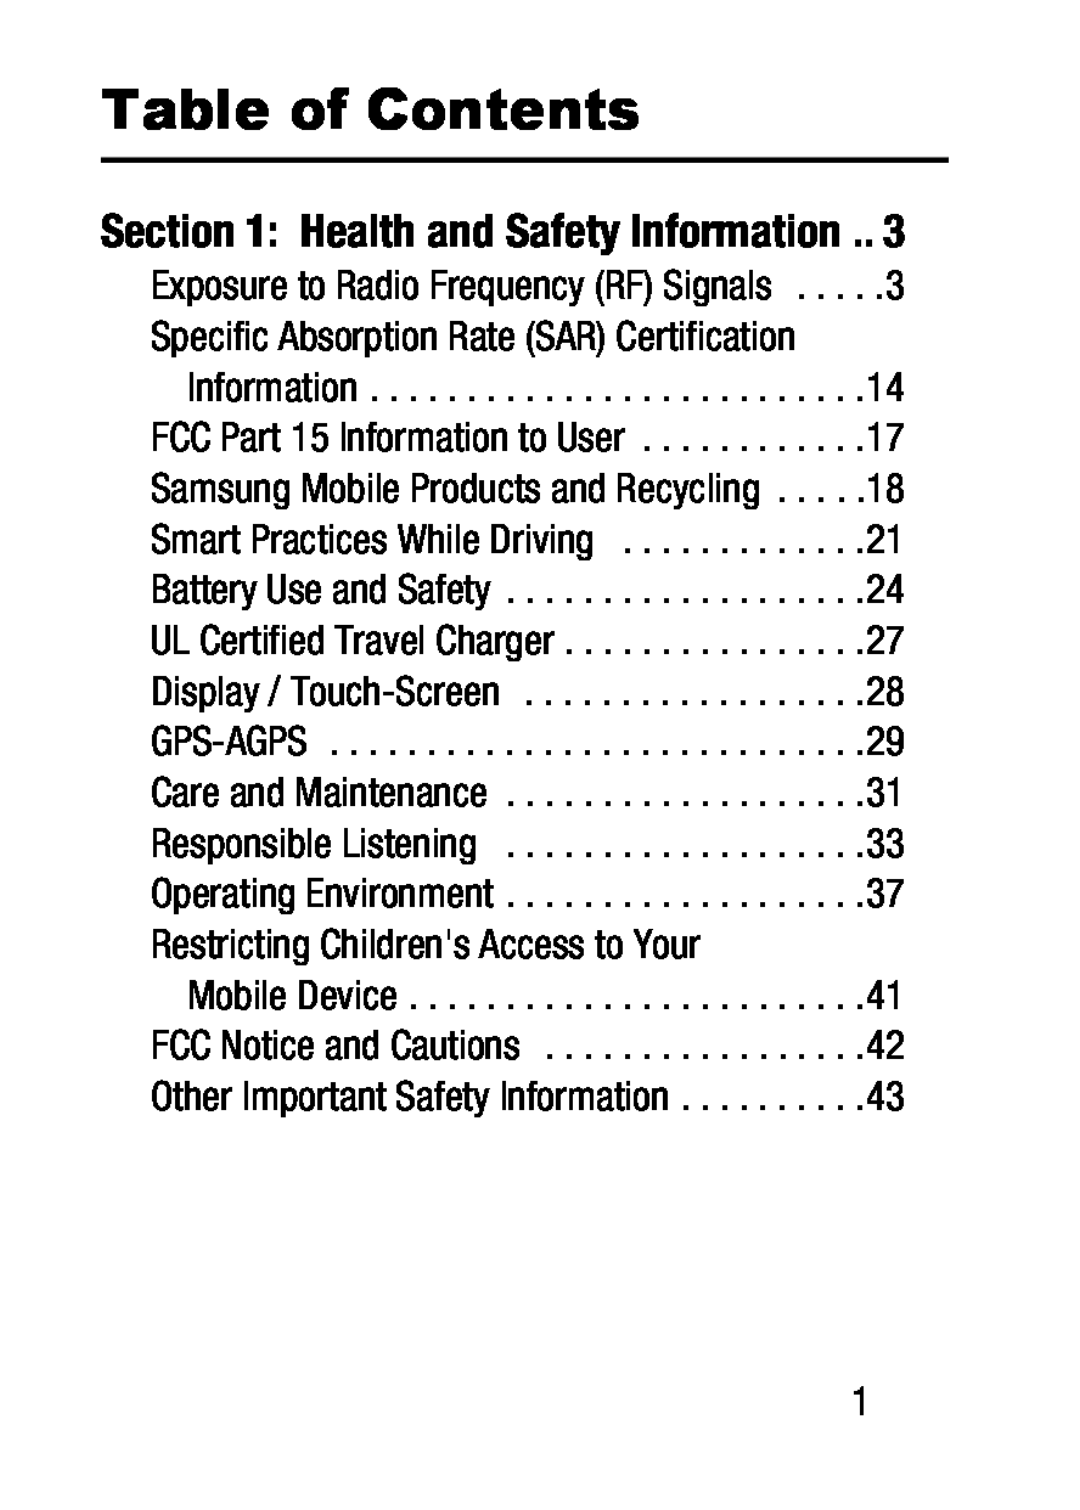 Section 1: Health and Safety Information Galaxy Tab 4 10.1 Verizon